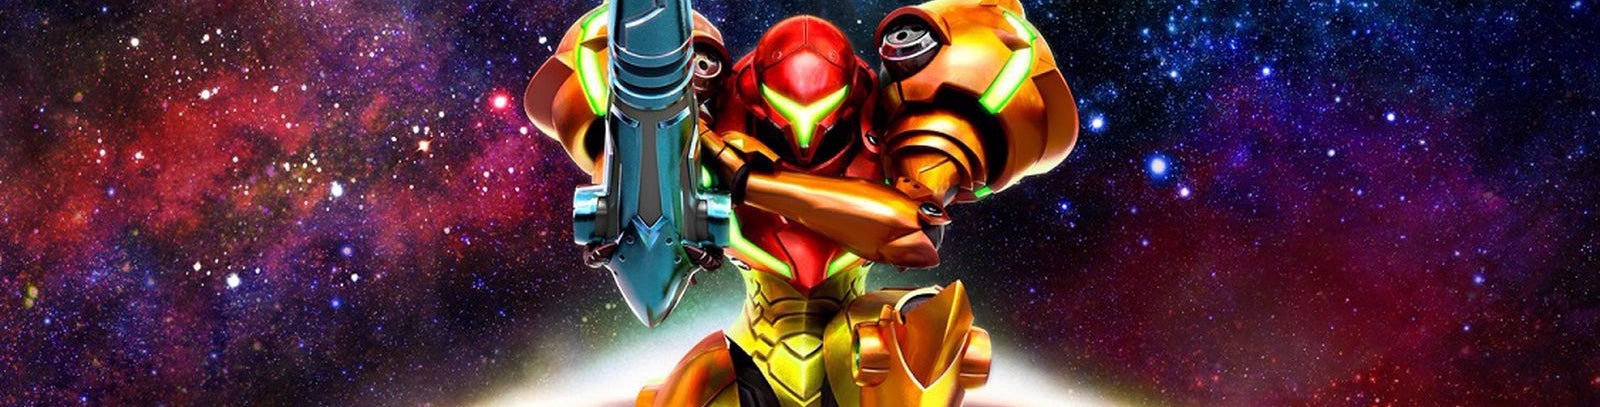 Image for The true return of Metroid is a glorious thing to behold